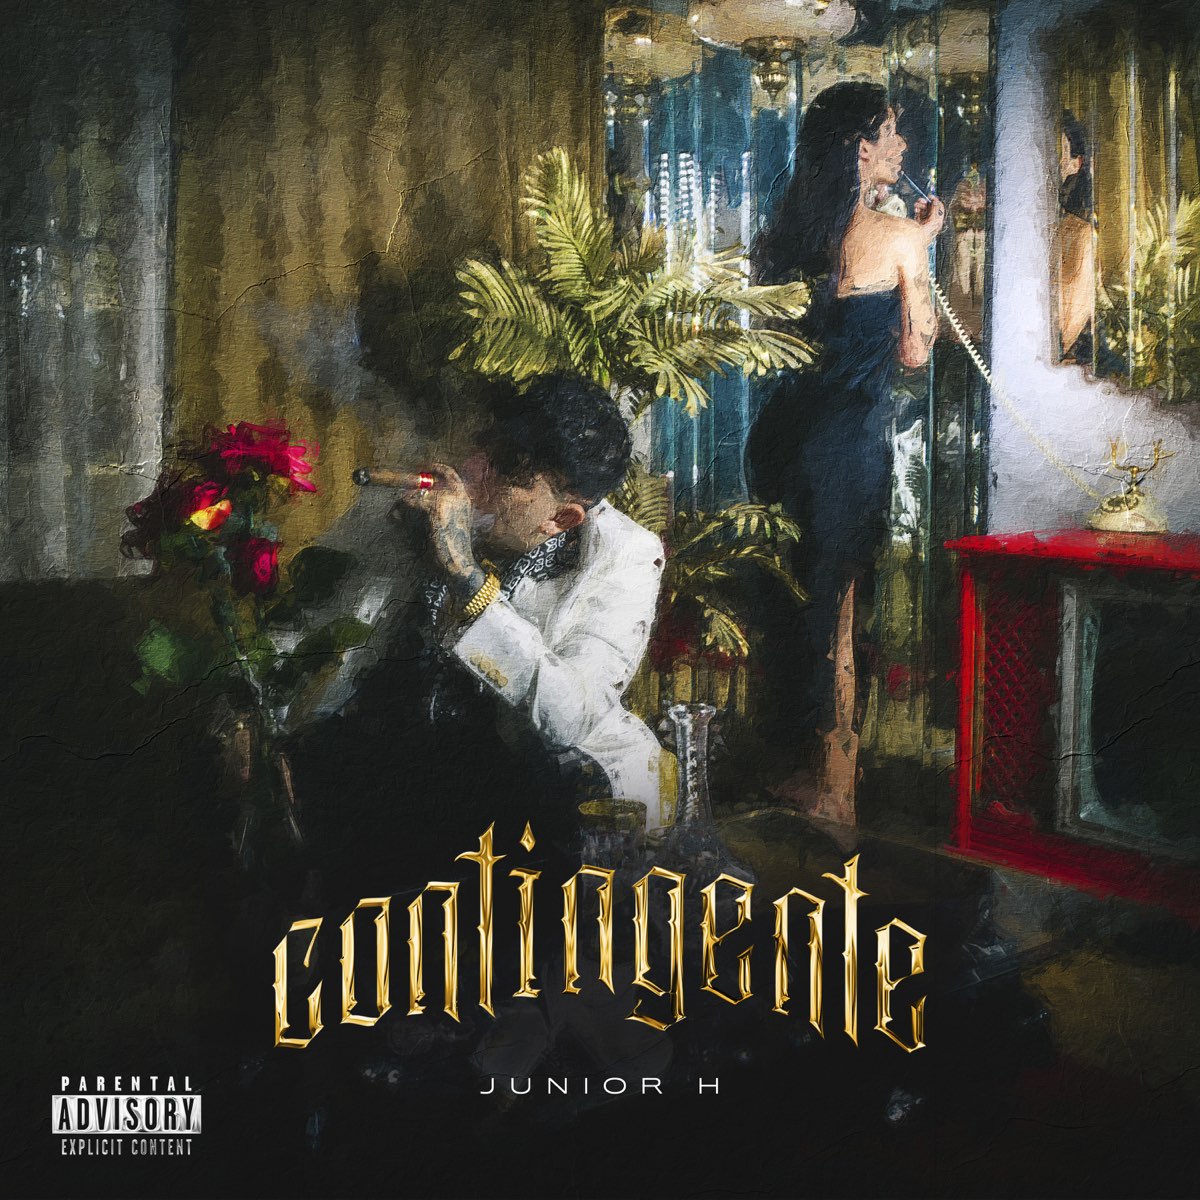 Contingente by Junior H on Apple Music